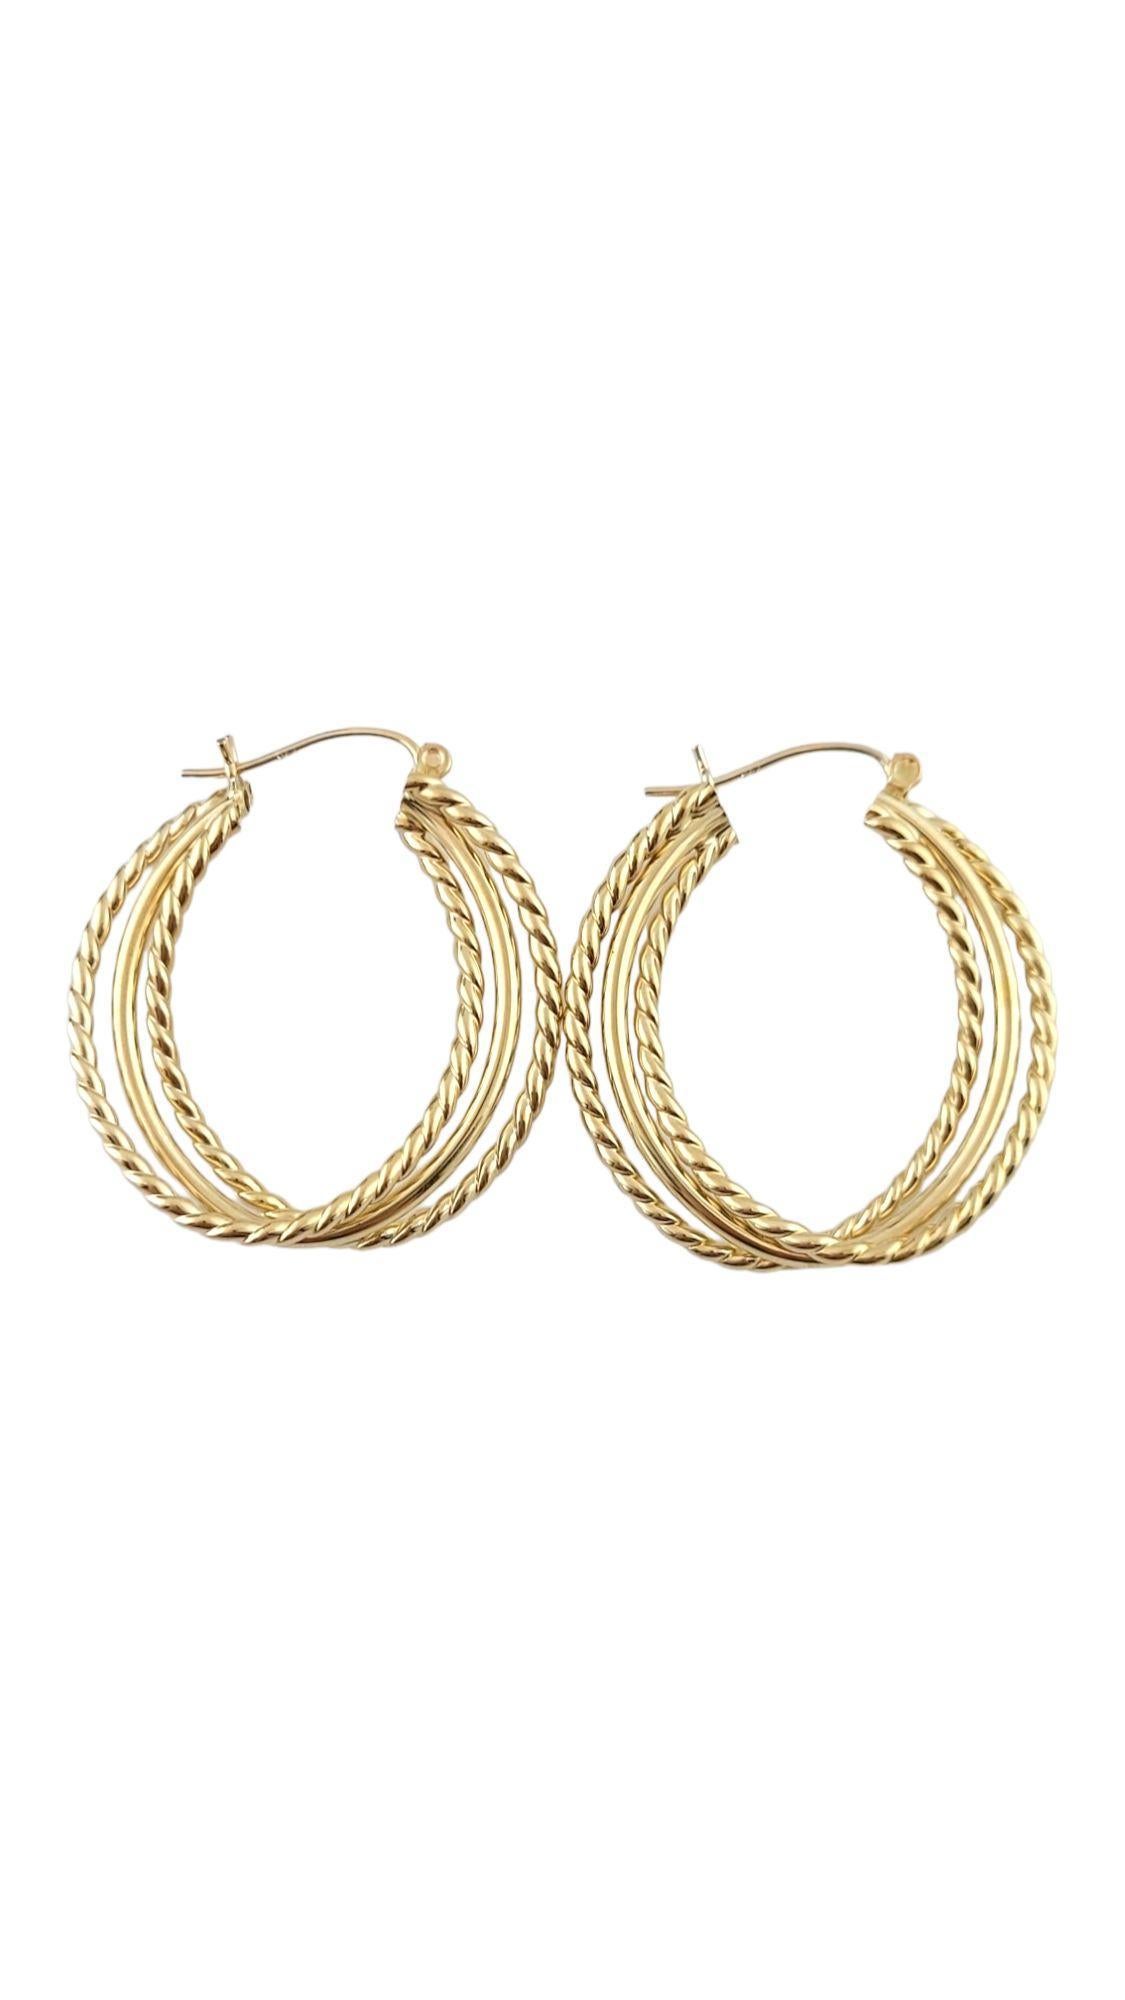 Vintage 14K Yellow Gold Triple Textured Hoop Earrings

These gorgeous 14K yellow gold triple hoops have a beautiful textured pattern!

Size: 32.4mm X 30.6mm X 5.8mm

Weight: 4.90 g/ 3.2 dwt

Hallmark: 14K

Very good condition, professionally